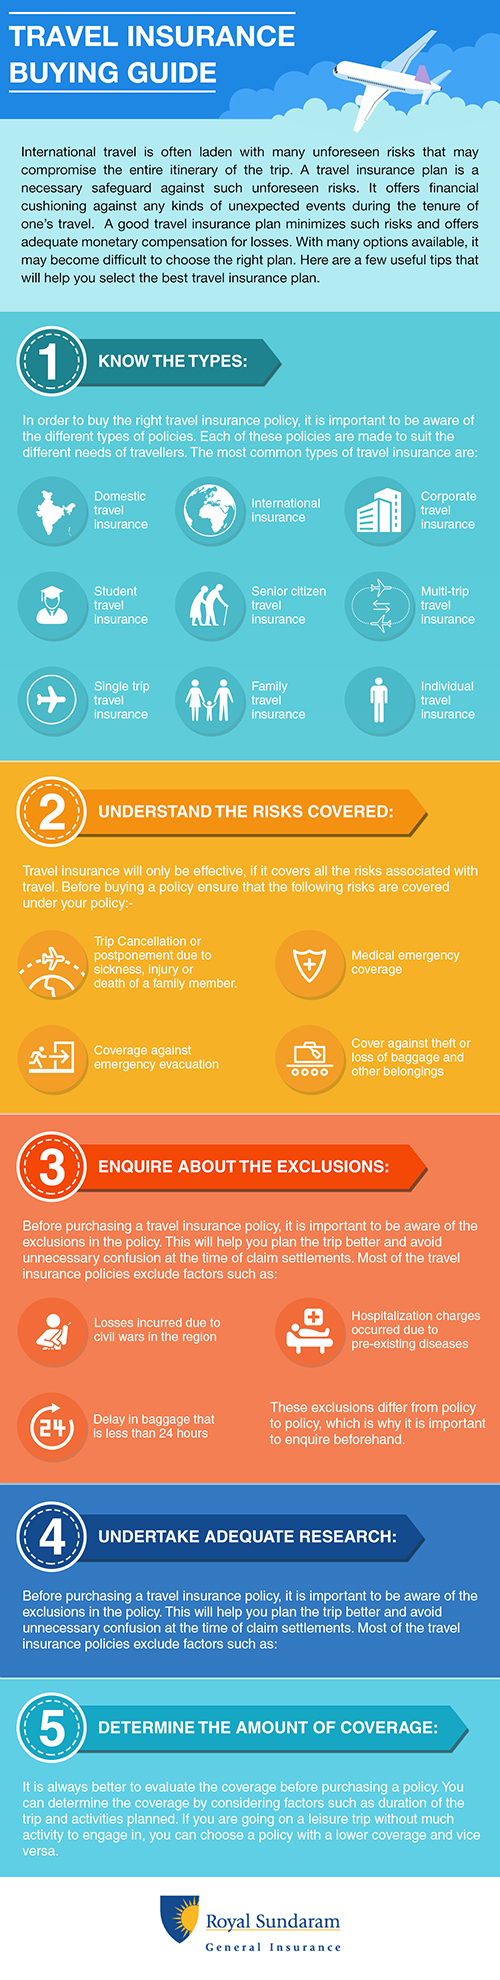 Travel Insurance Buying Guide